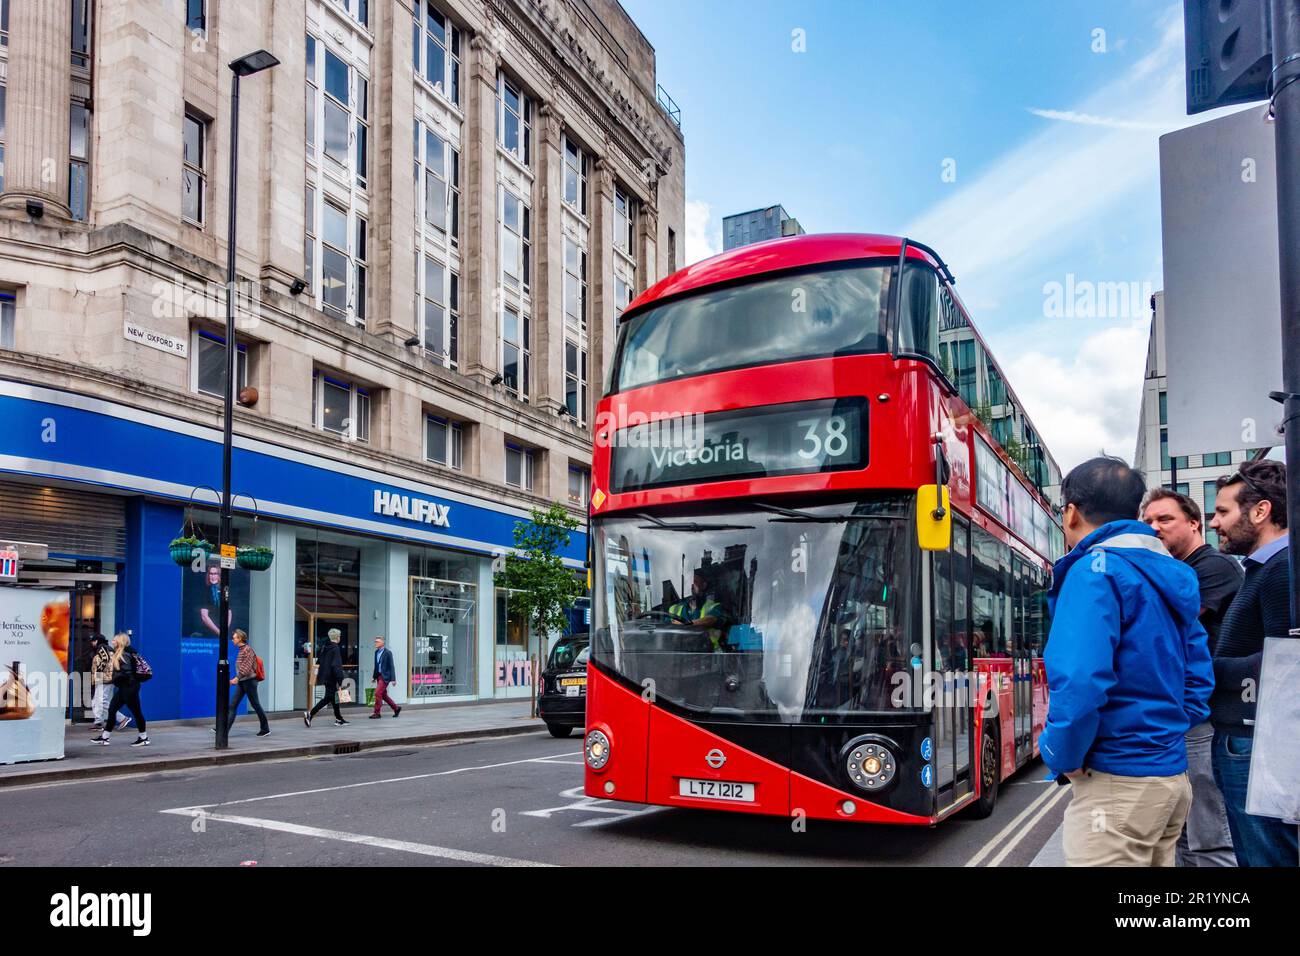 Iconic red, no.38 double decker bus in London, UK Stock Photo